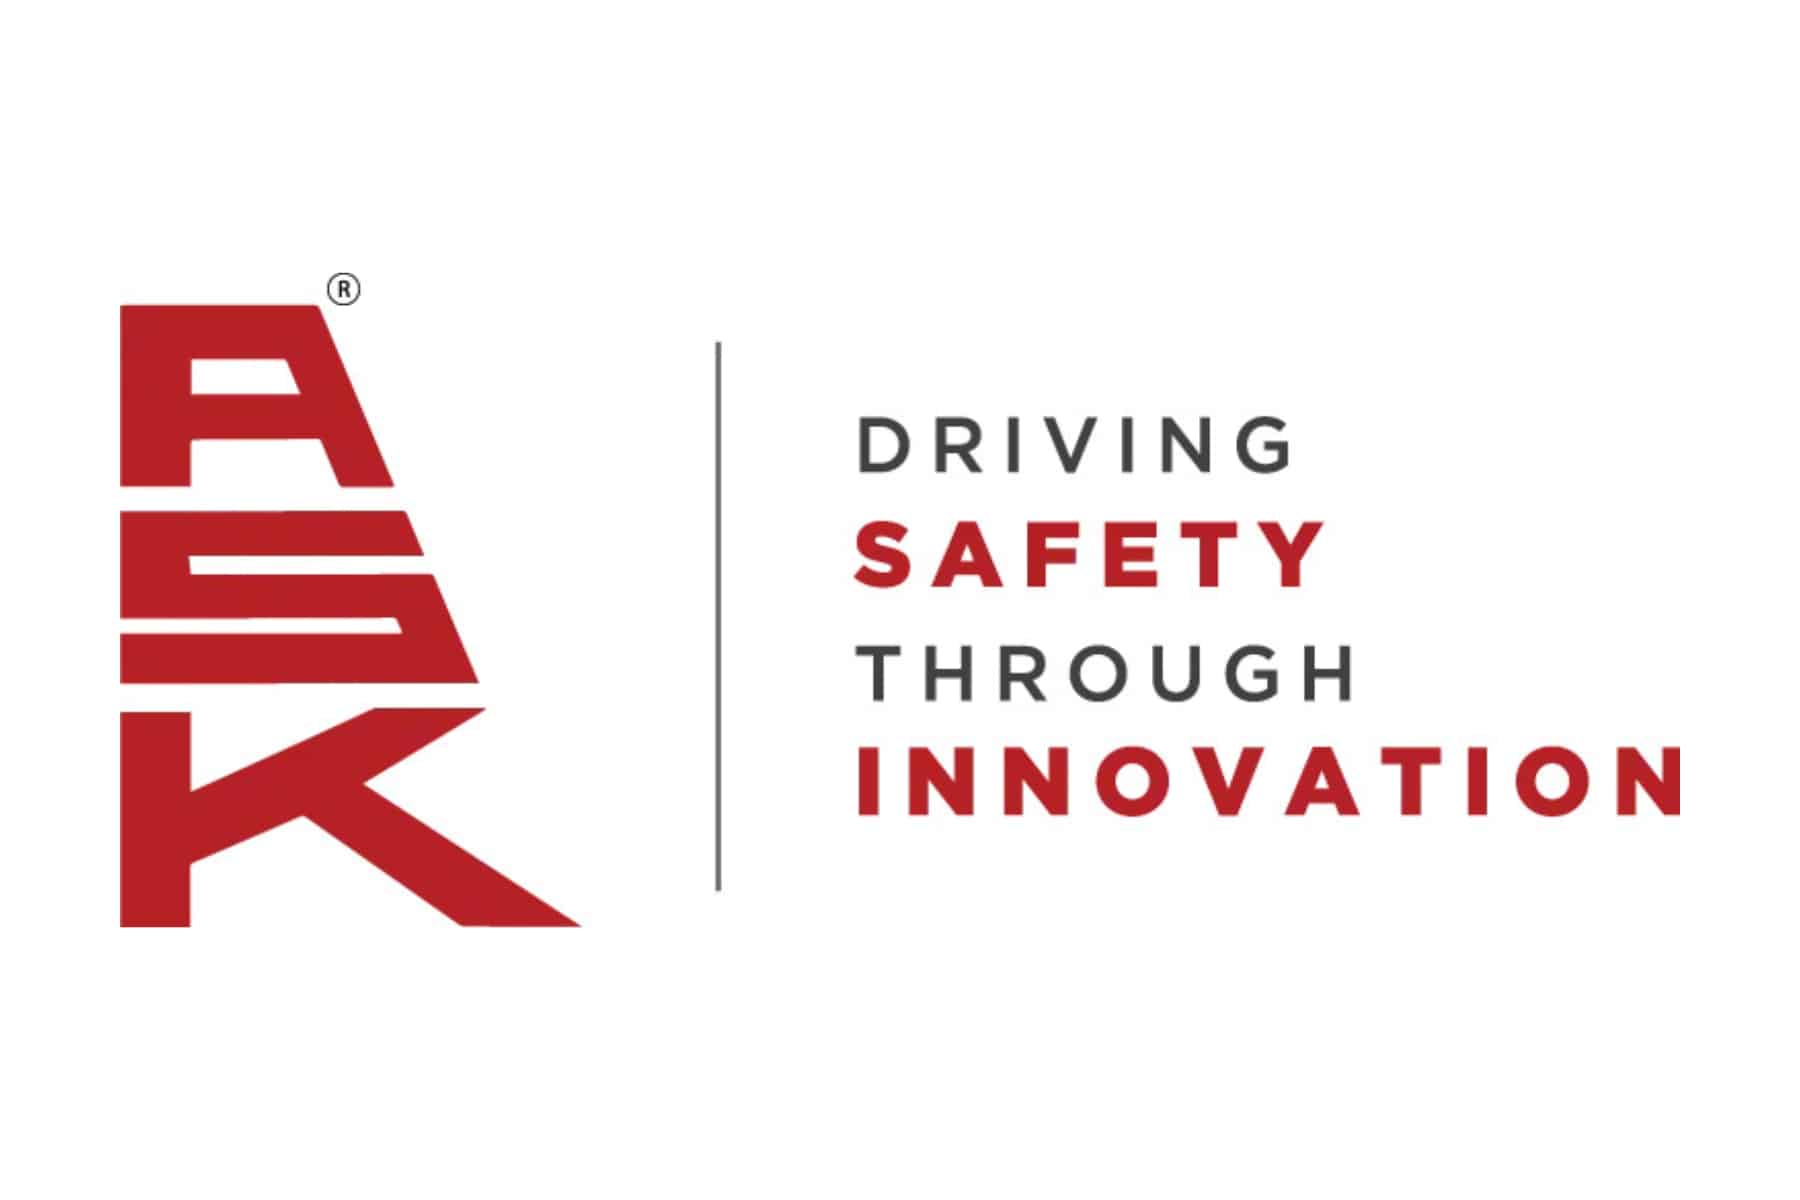 ASK Automotive has filed for an IPO